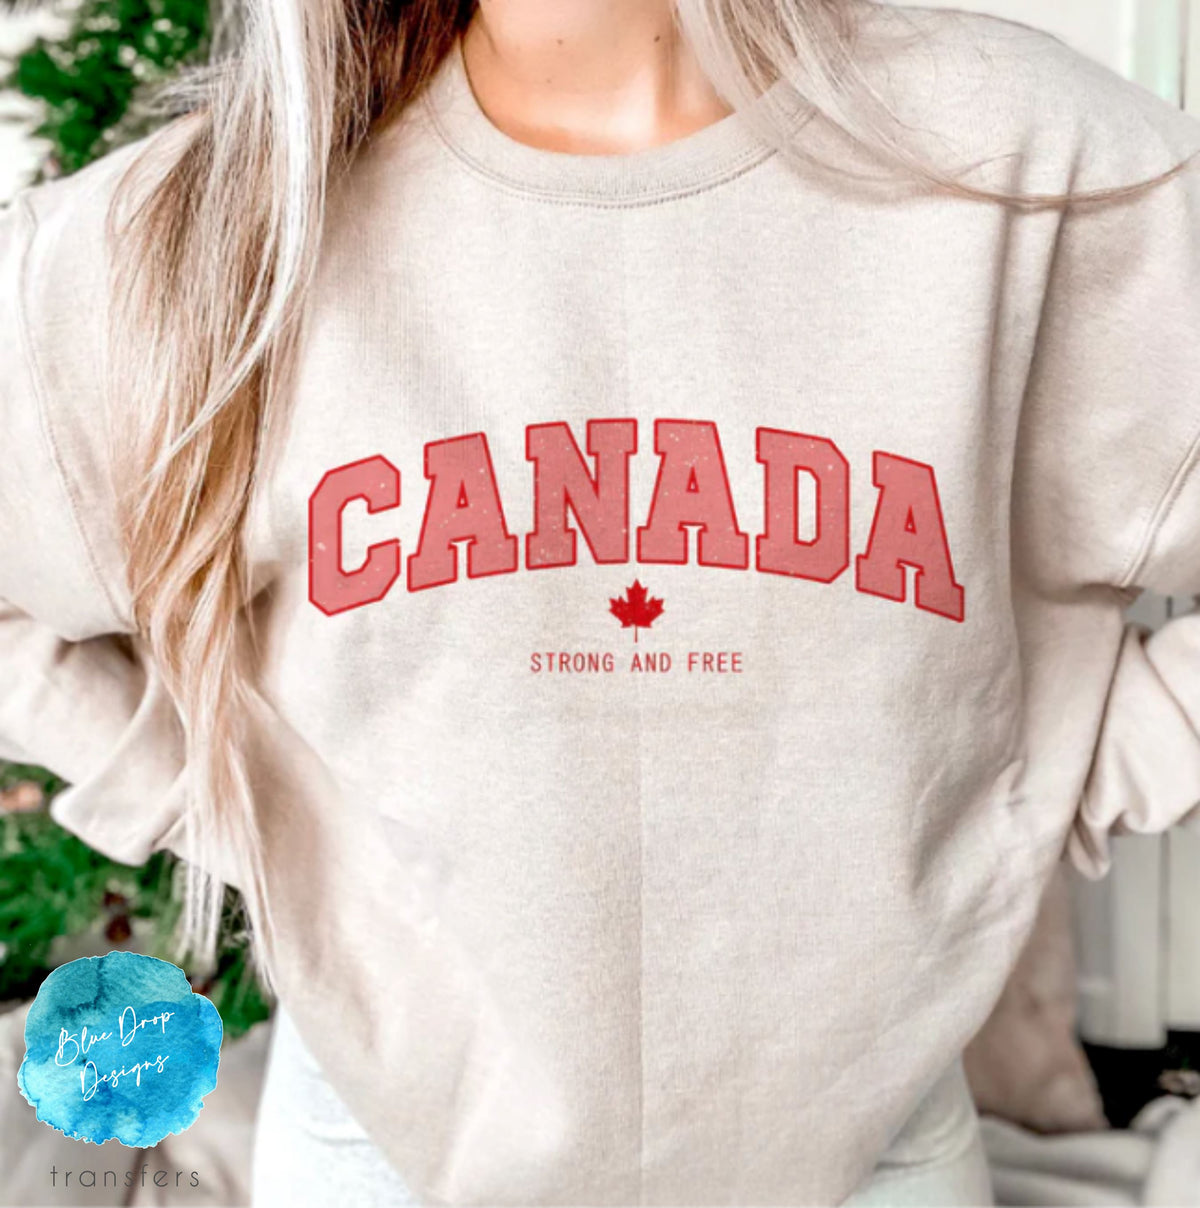 Canada Strong and Free Full Colour Transfer Direct to Film Colour Transfer Blue Drop Designs 